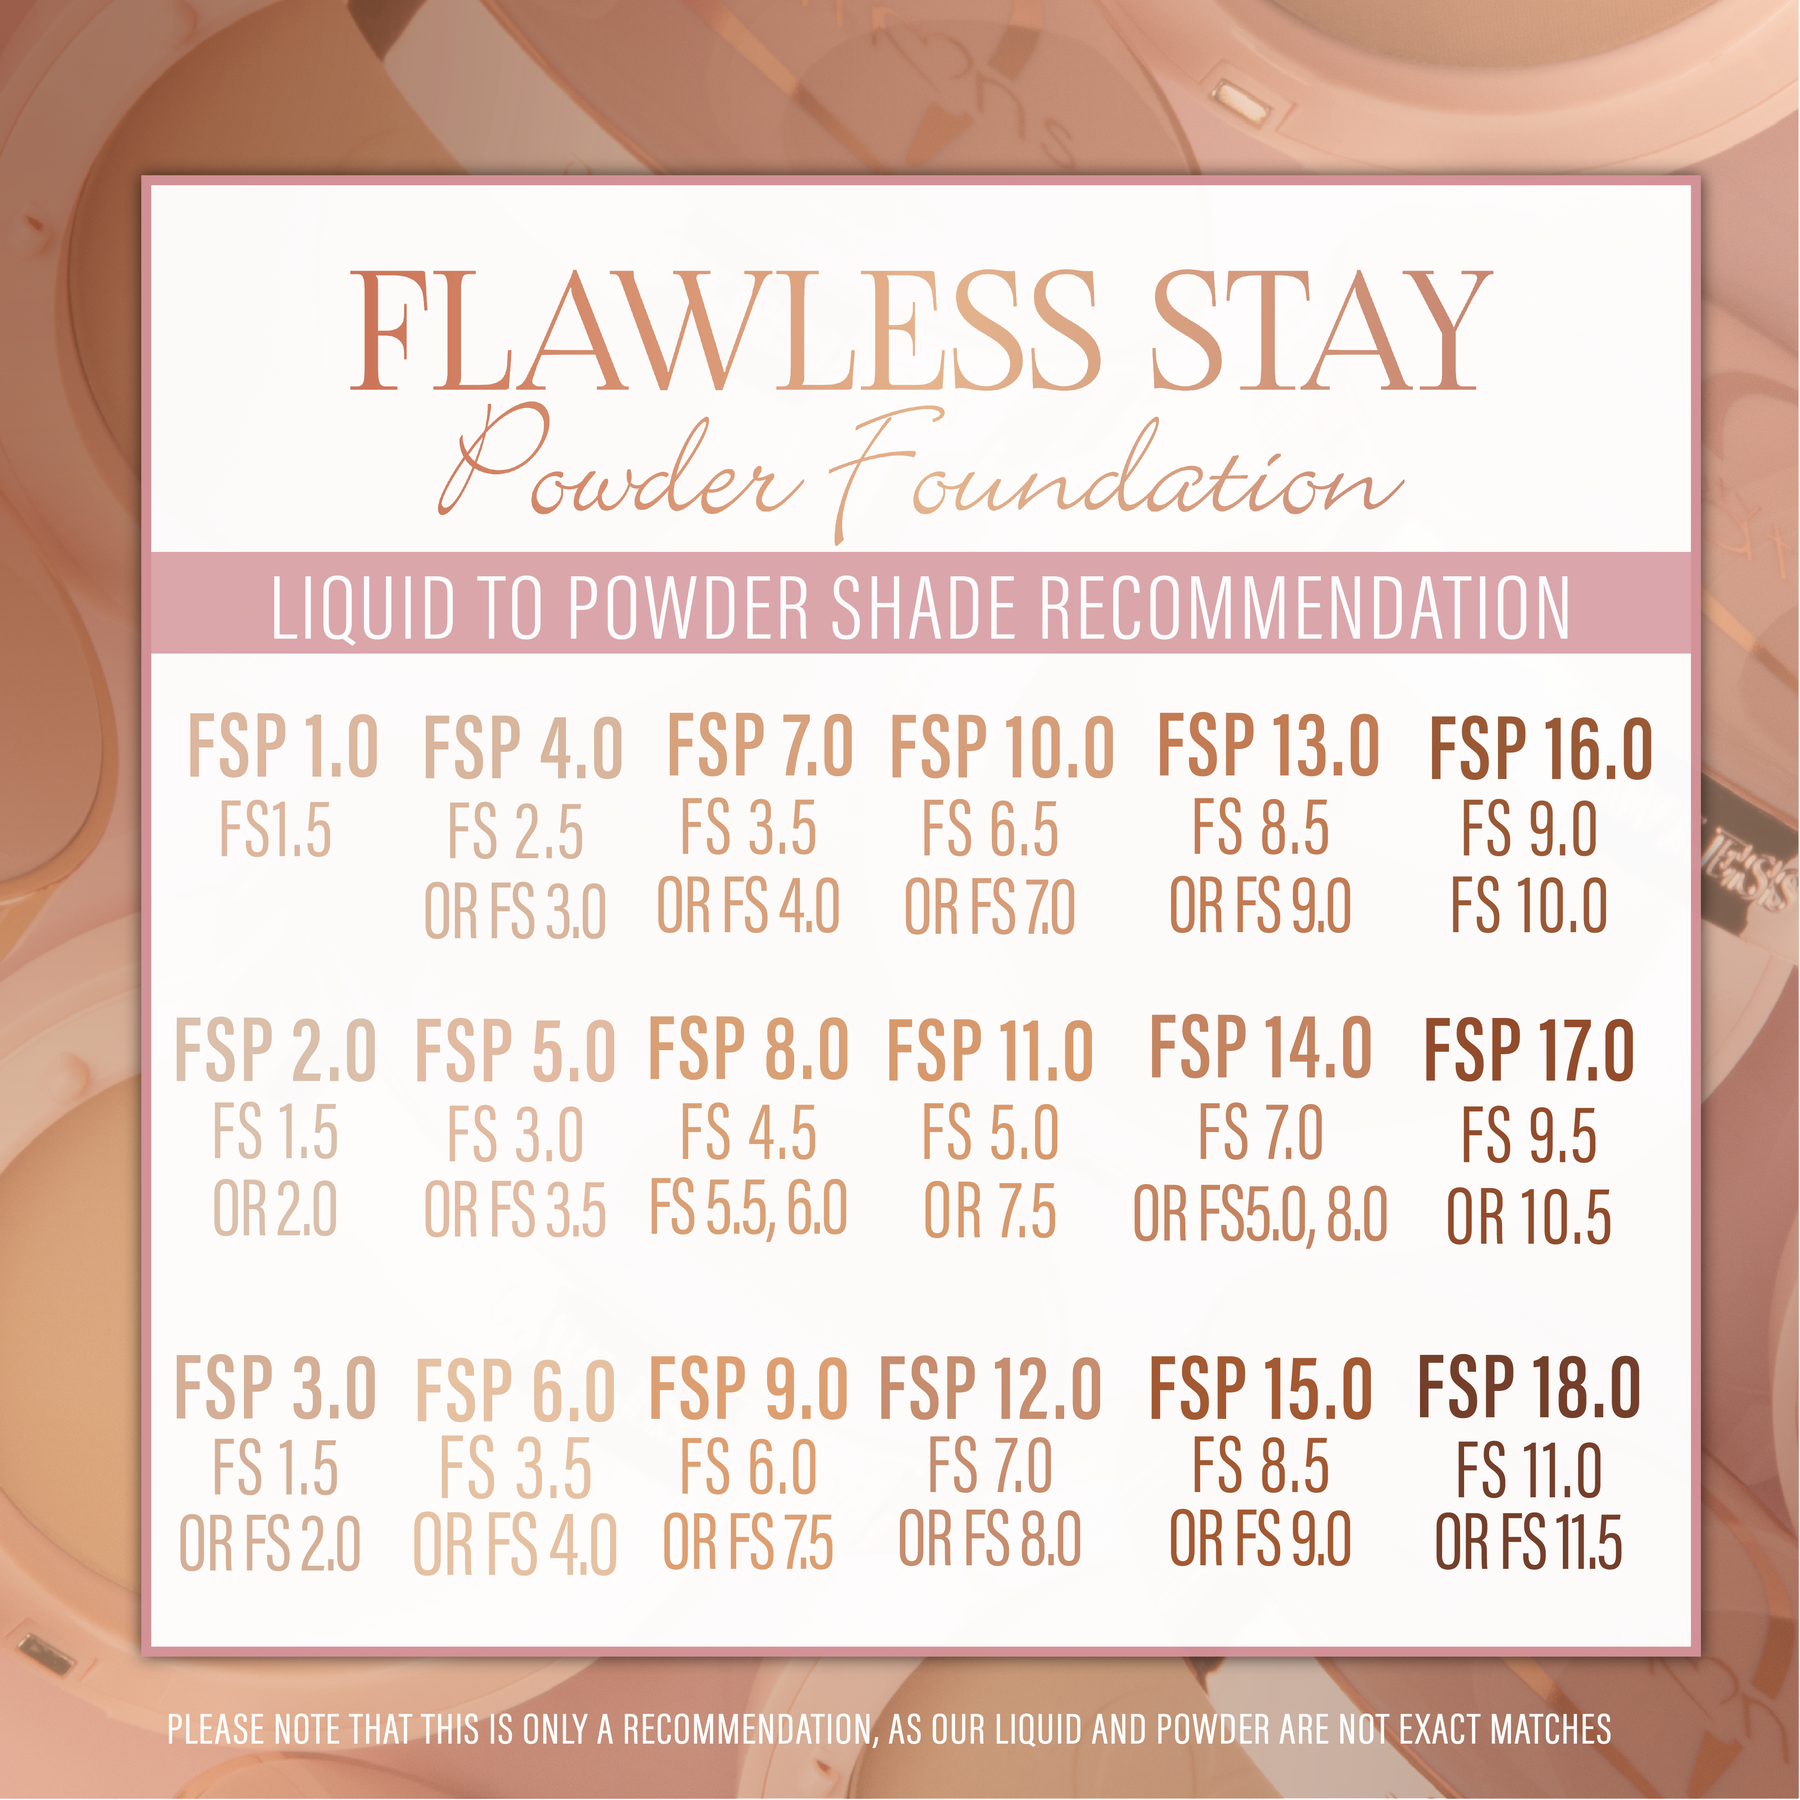 Polvo Compacto Beauty Creations Flawless Stay